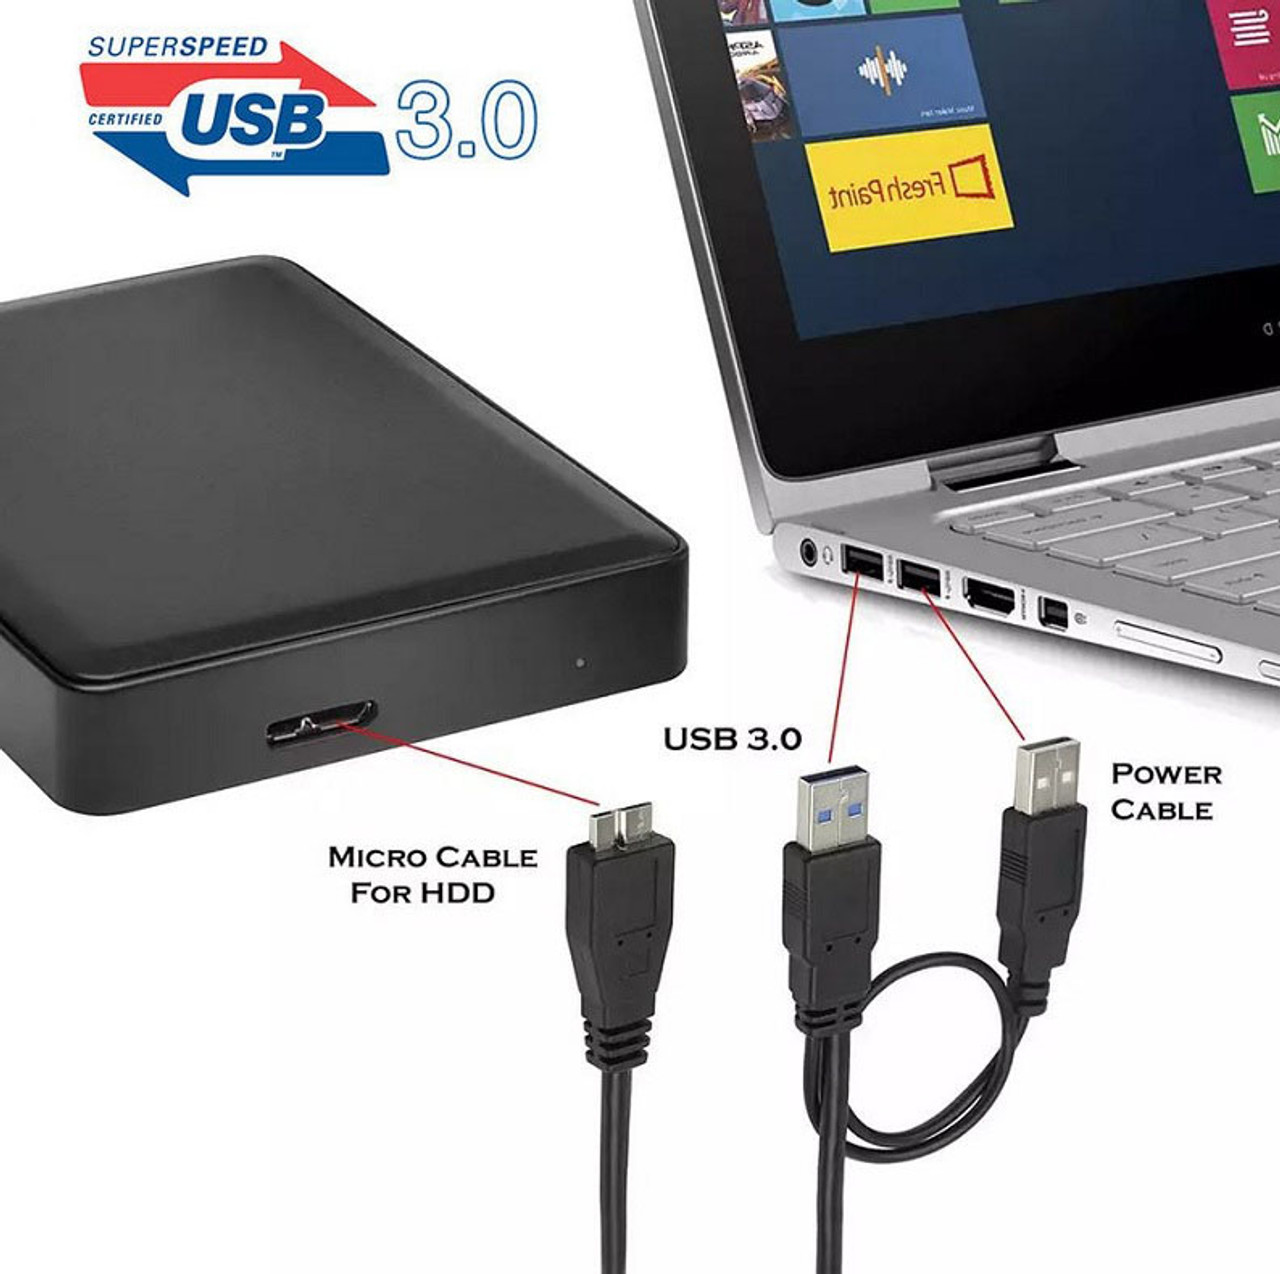 Micro USB 3.0 Adapter Cable Dual USB For External Hard Drive Portable HDD With Extra USB For Power Supply